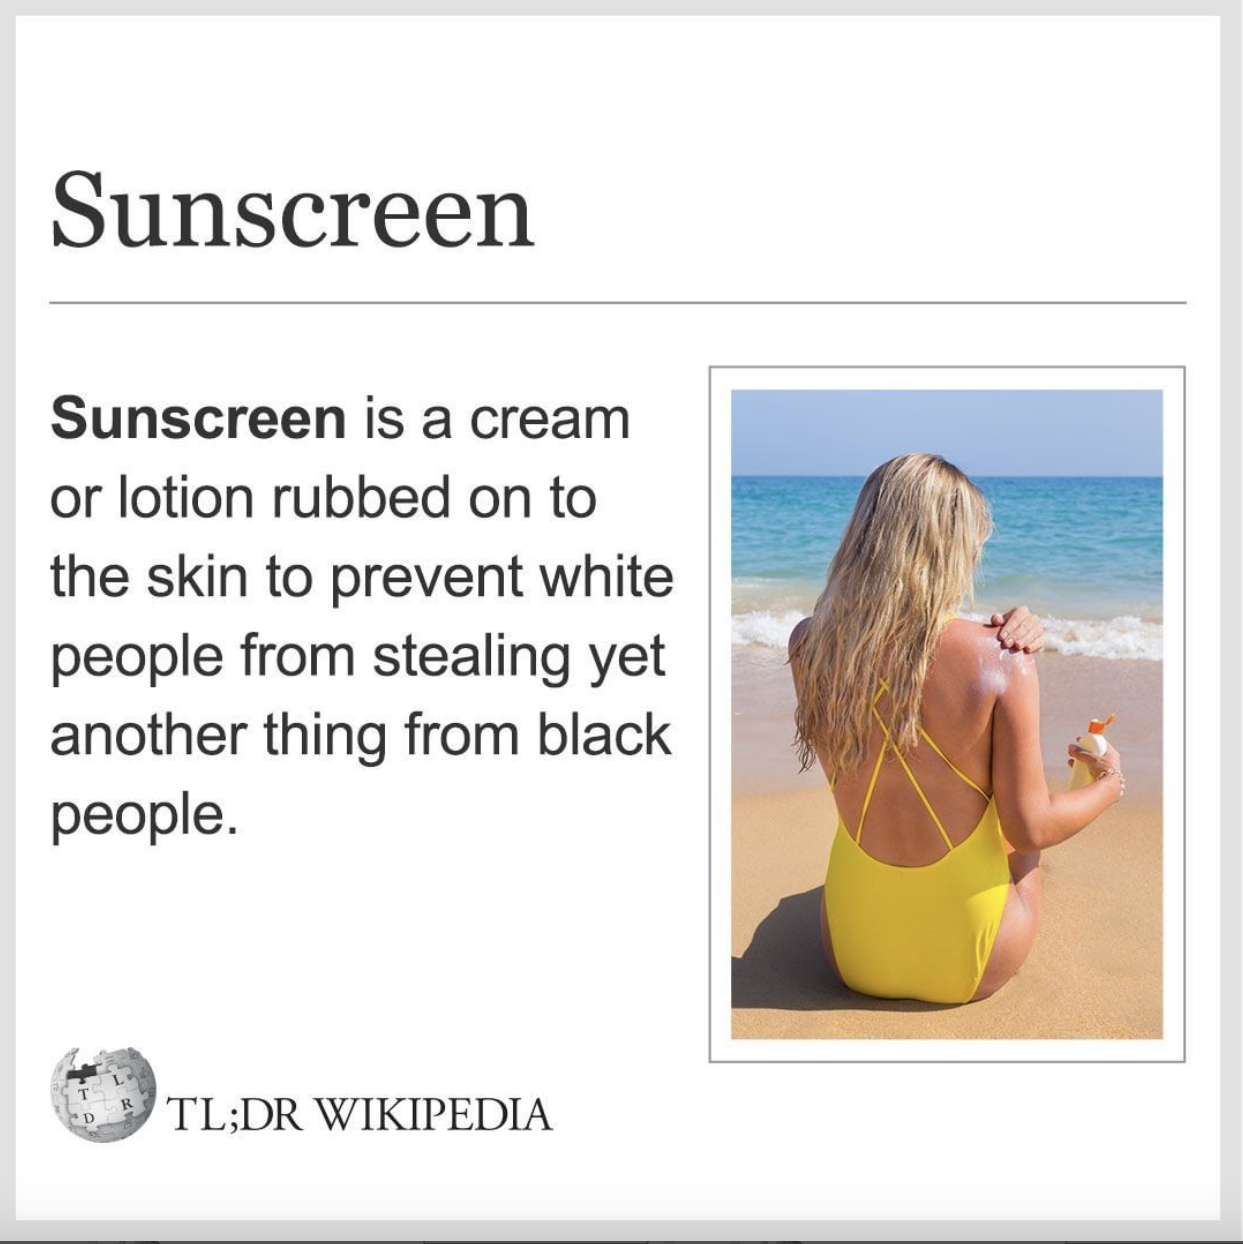 Wikipedia Memes - awkward moment quotes - Sunscreen Sunscreen is a cream or lotion rubbed on to the skin to prevent white people from stealing yet another thing from black people. Tl;Dr Wikipedia